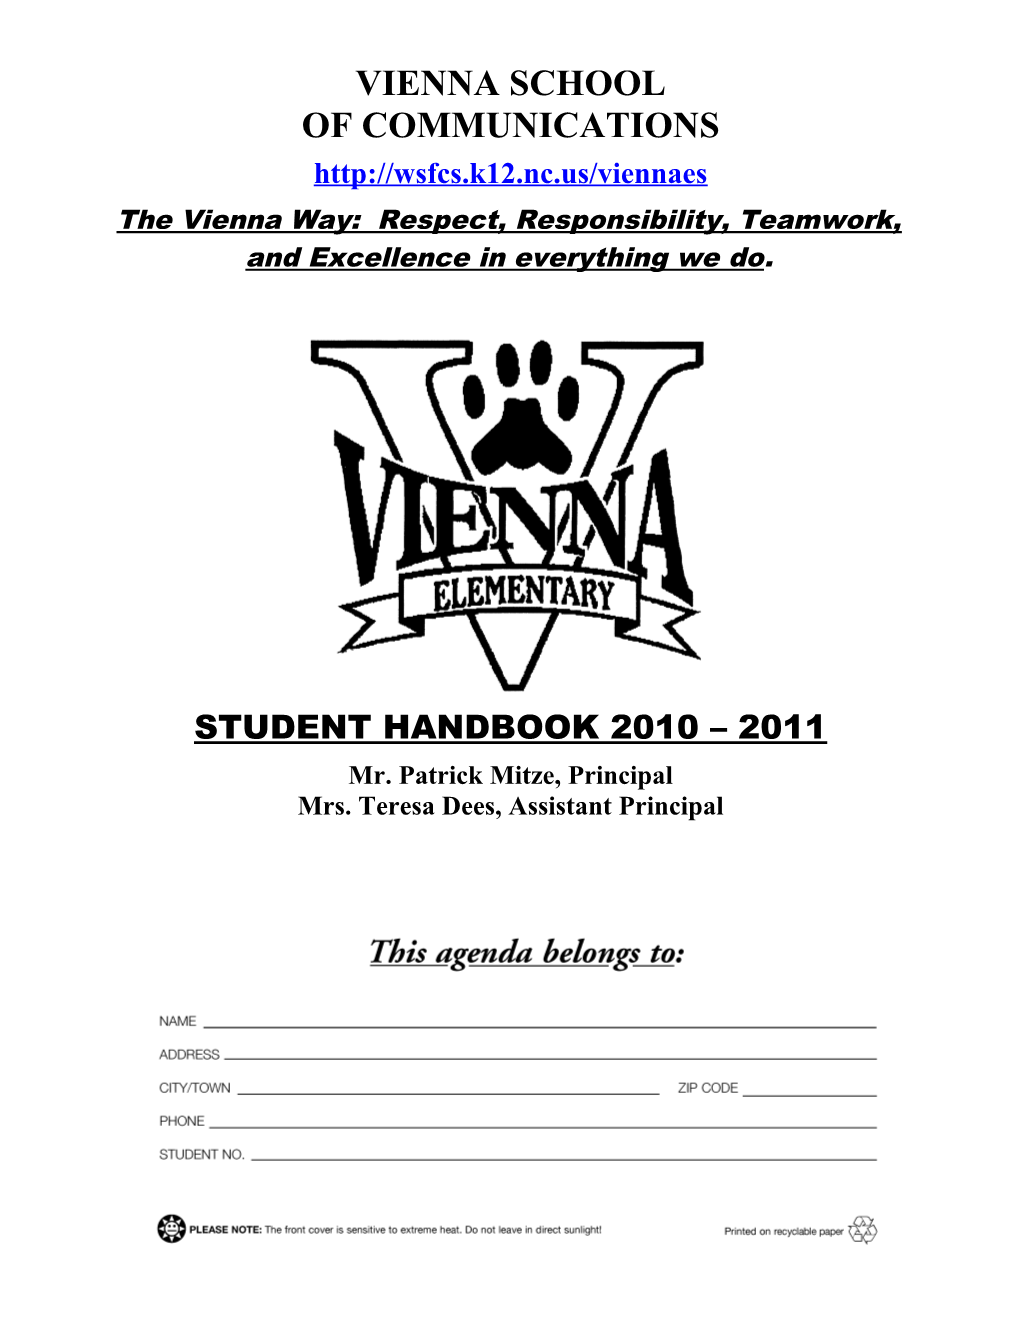 The Vienna Way: Respect, Responsibility, Teamwork, and Excellence in Everything We Do